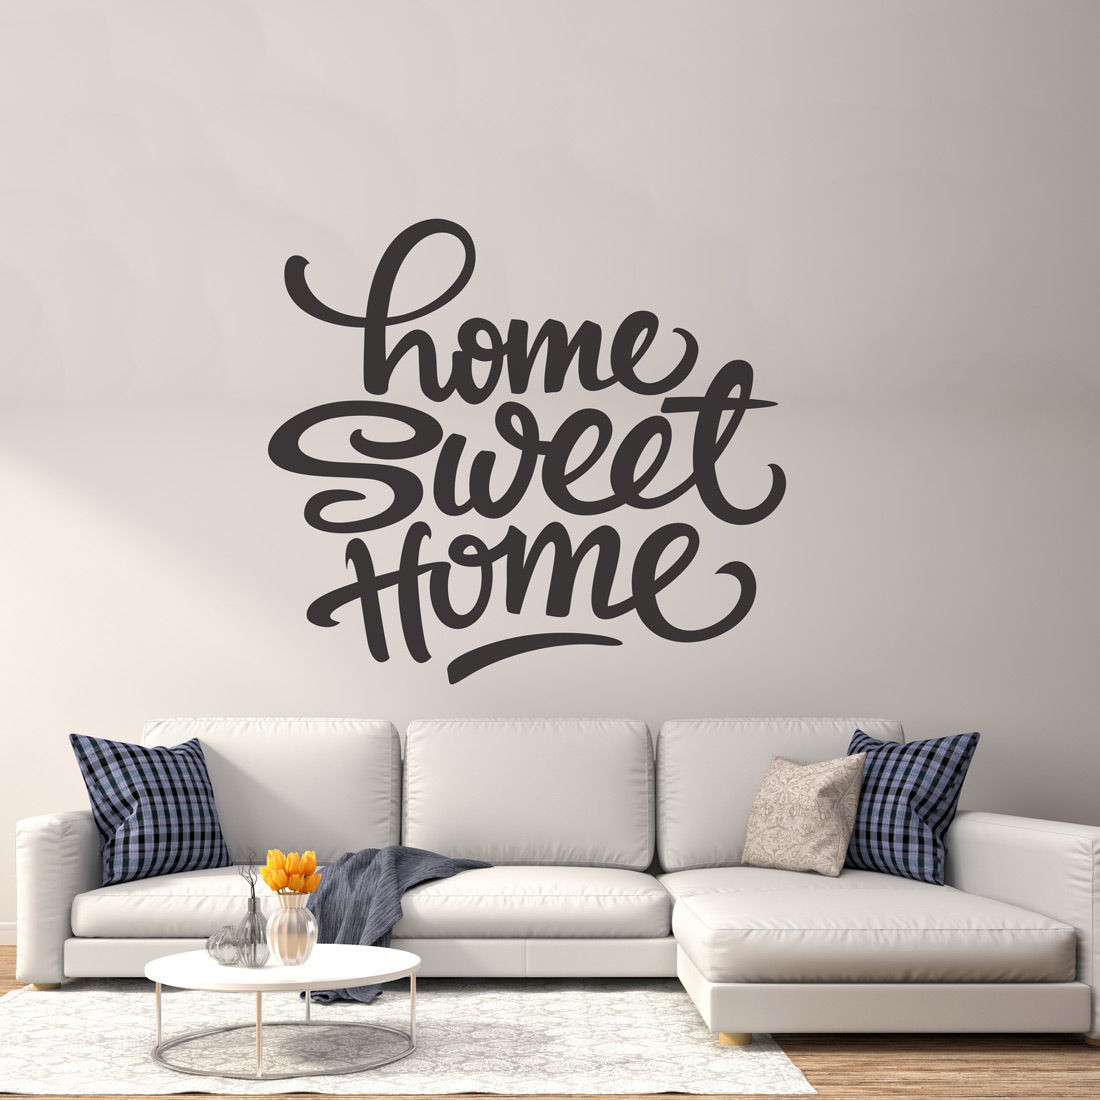 Wall Decals For Living Room
 Sweet Home Wall Decor Vinyl Sticker Decal Livingroom